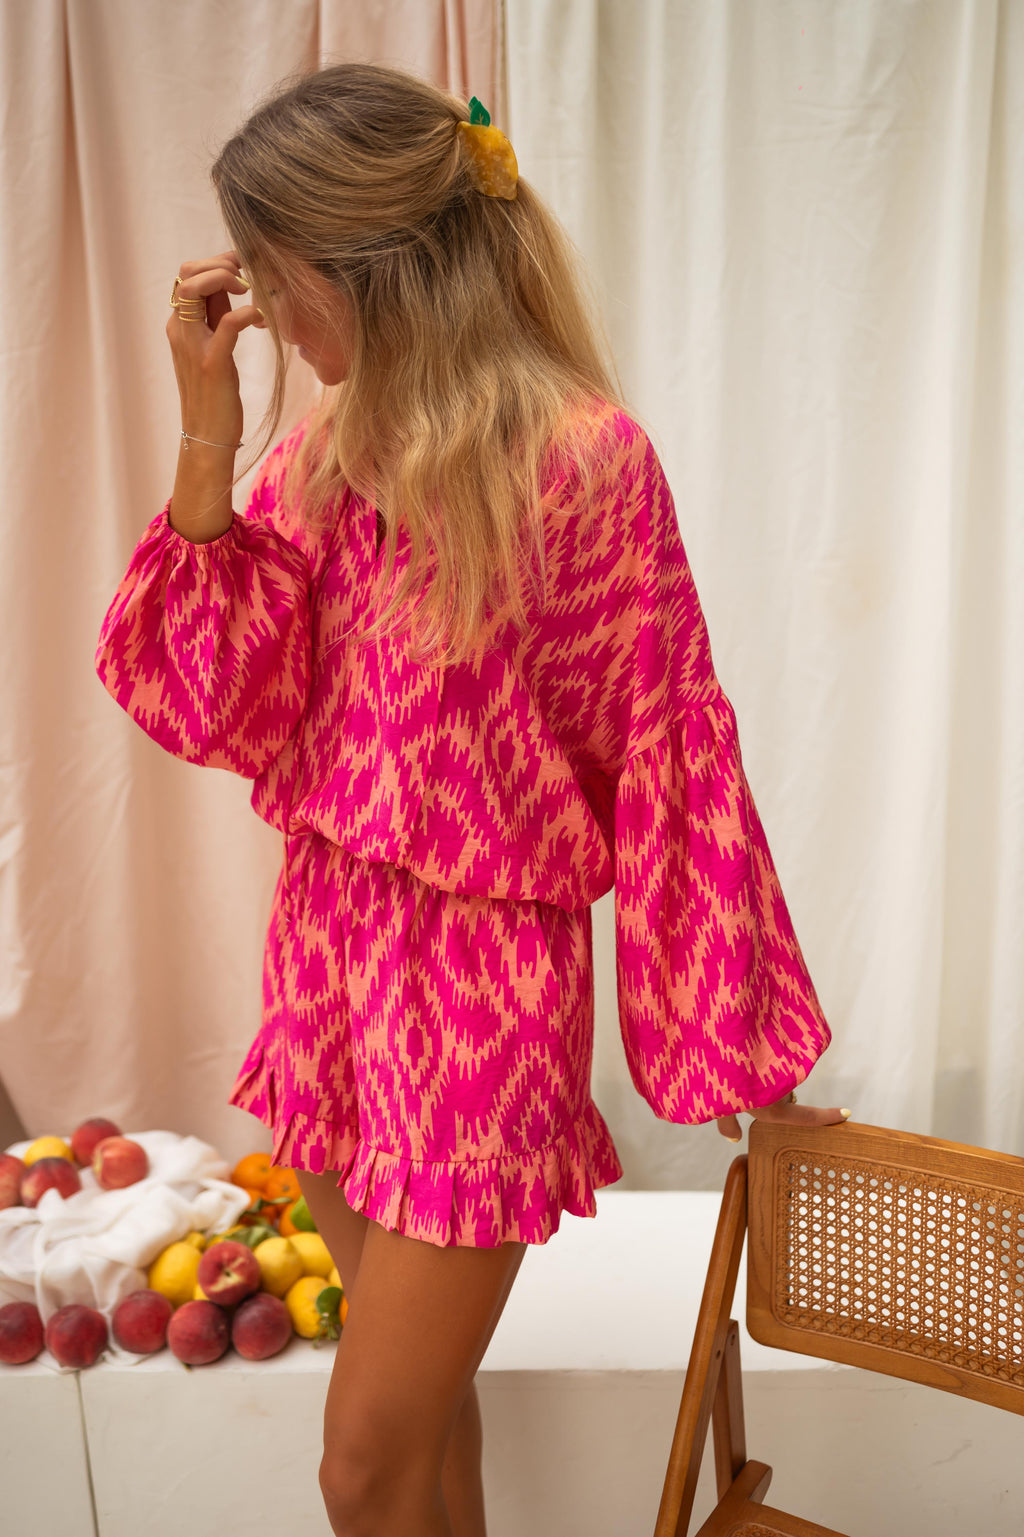 Constance shirt - pink patterned